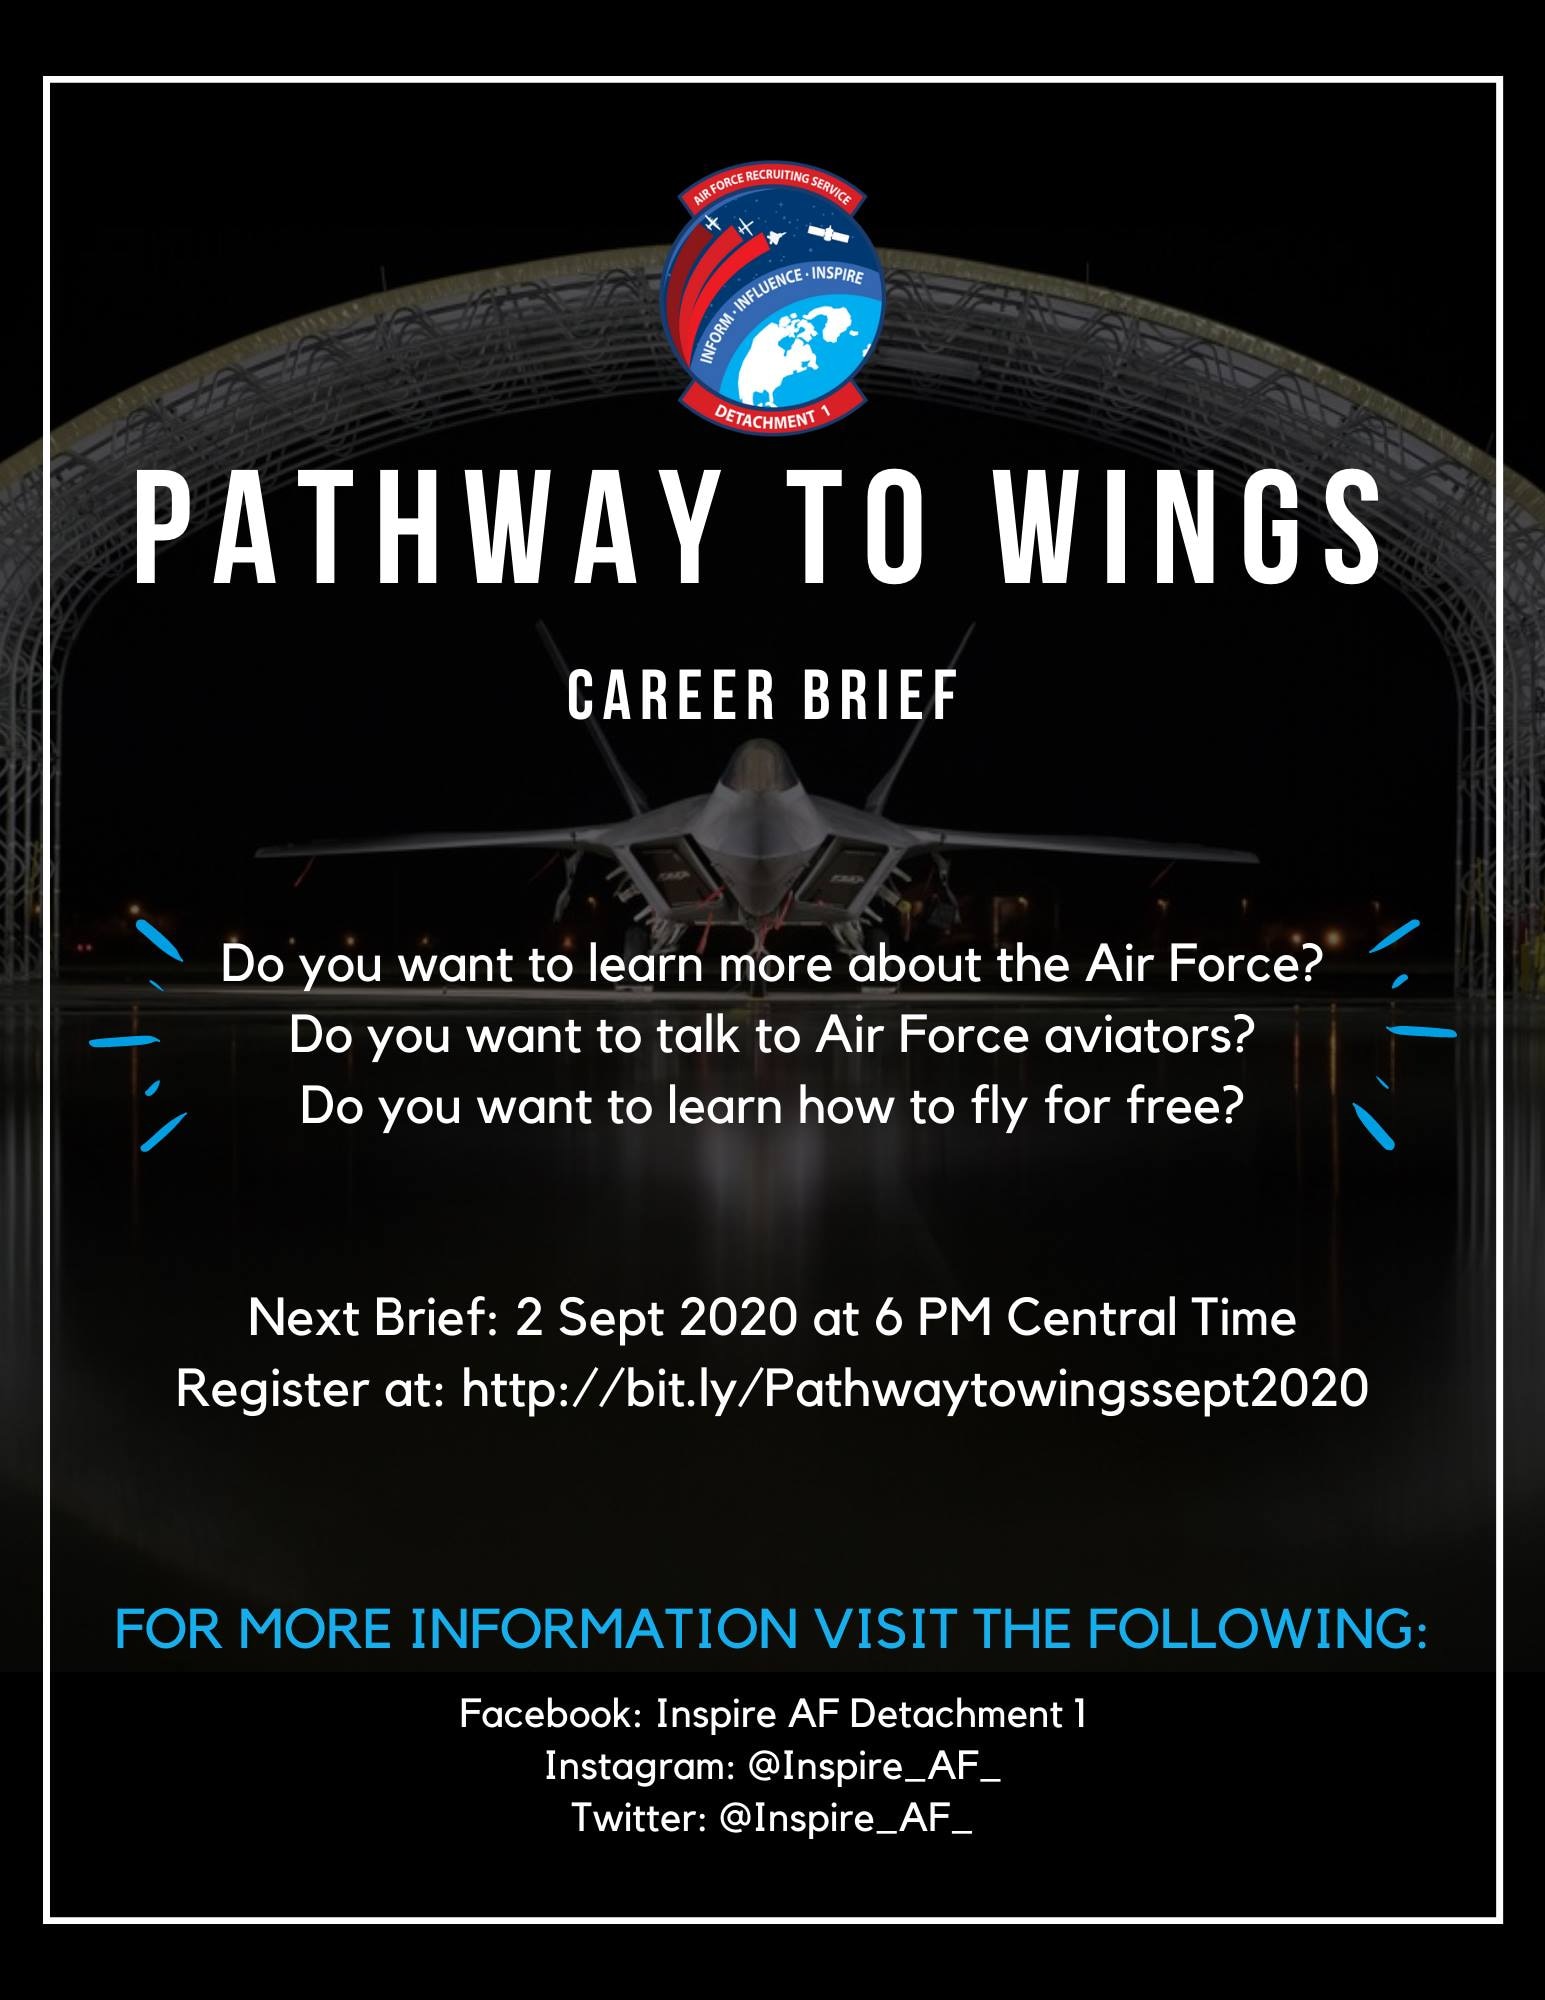 The Air Force Recruiting Service will host a “Pathway to Wings” interactive career briefing Sept. 2, 2020 at 6 p.m. central time for potential future Air Force officers interested in learning more about accessions and rated boards.